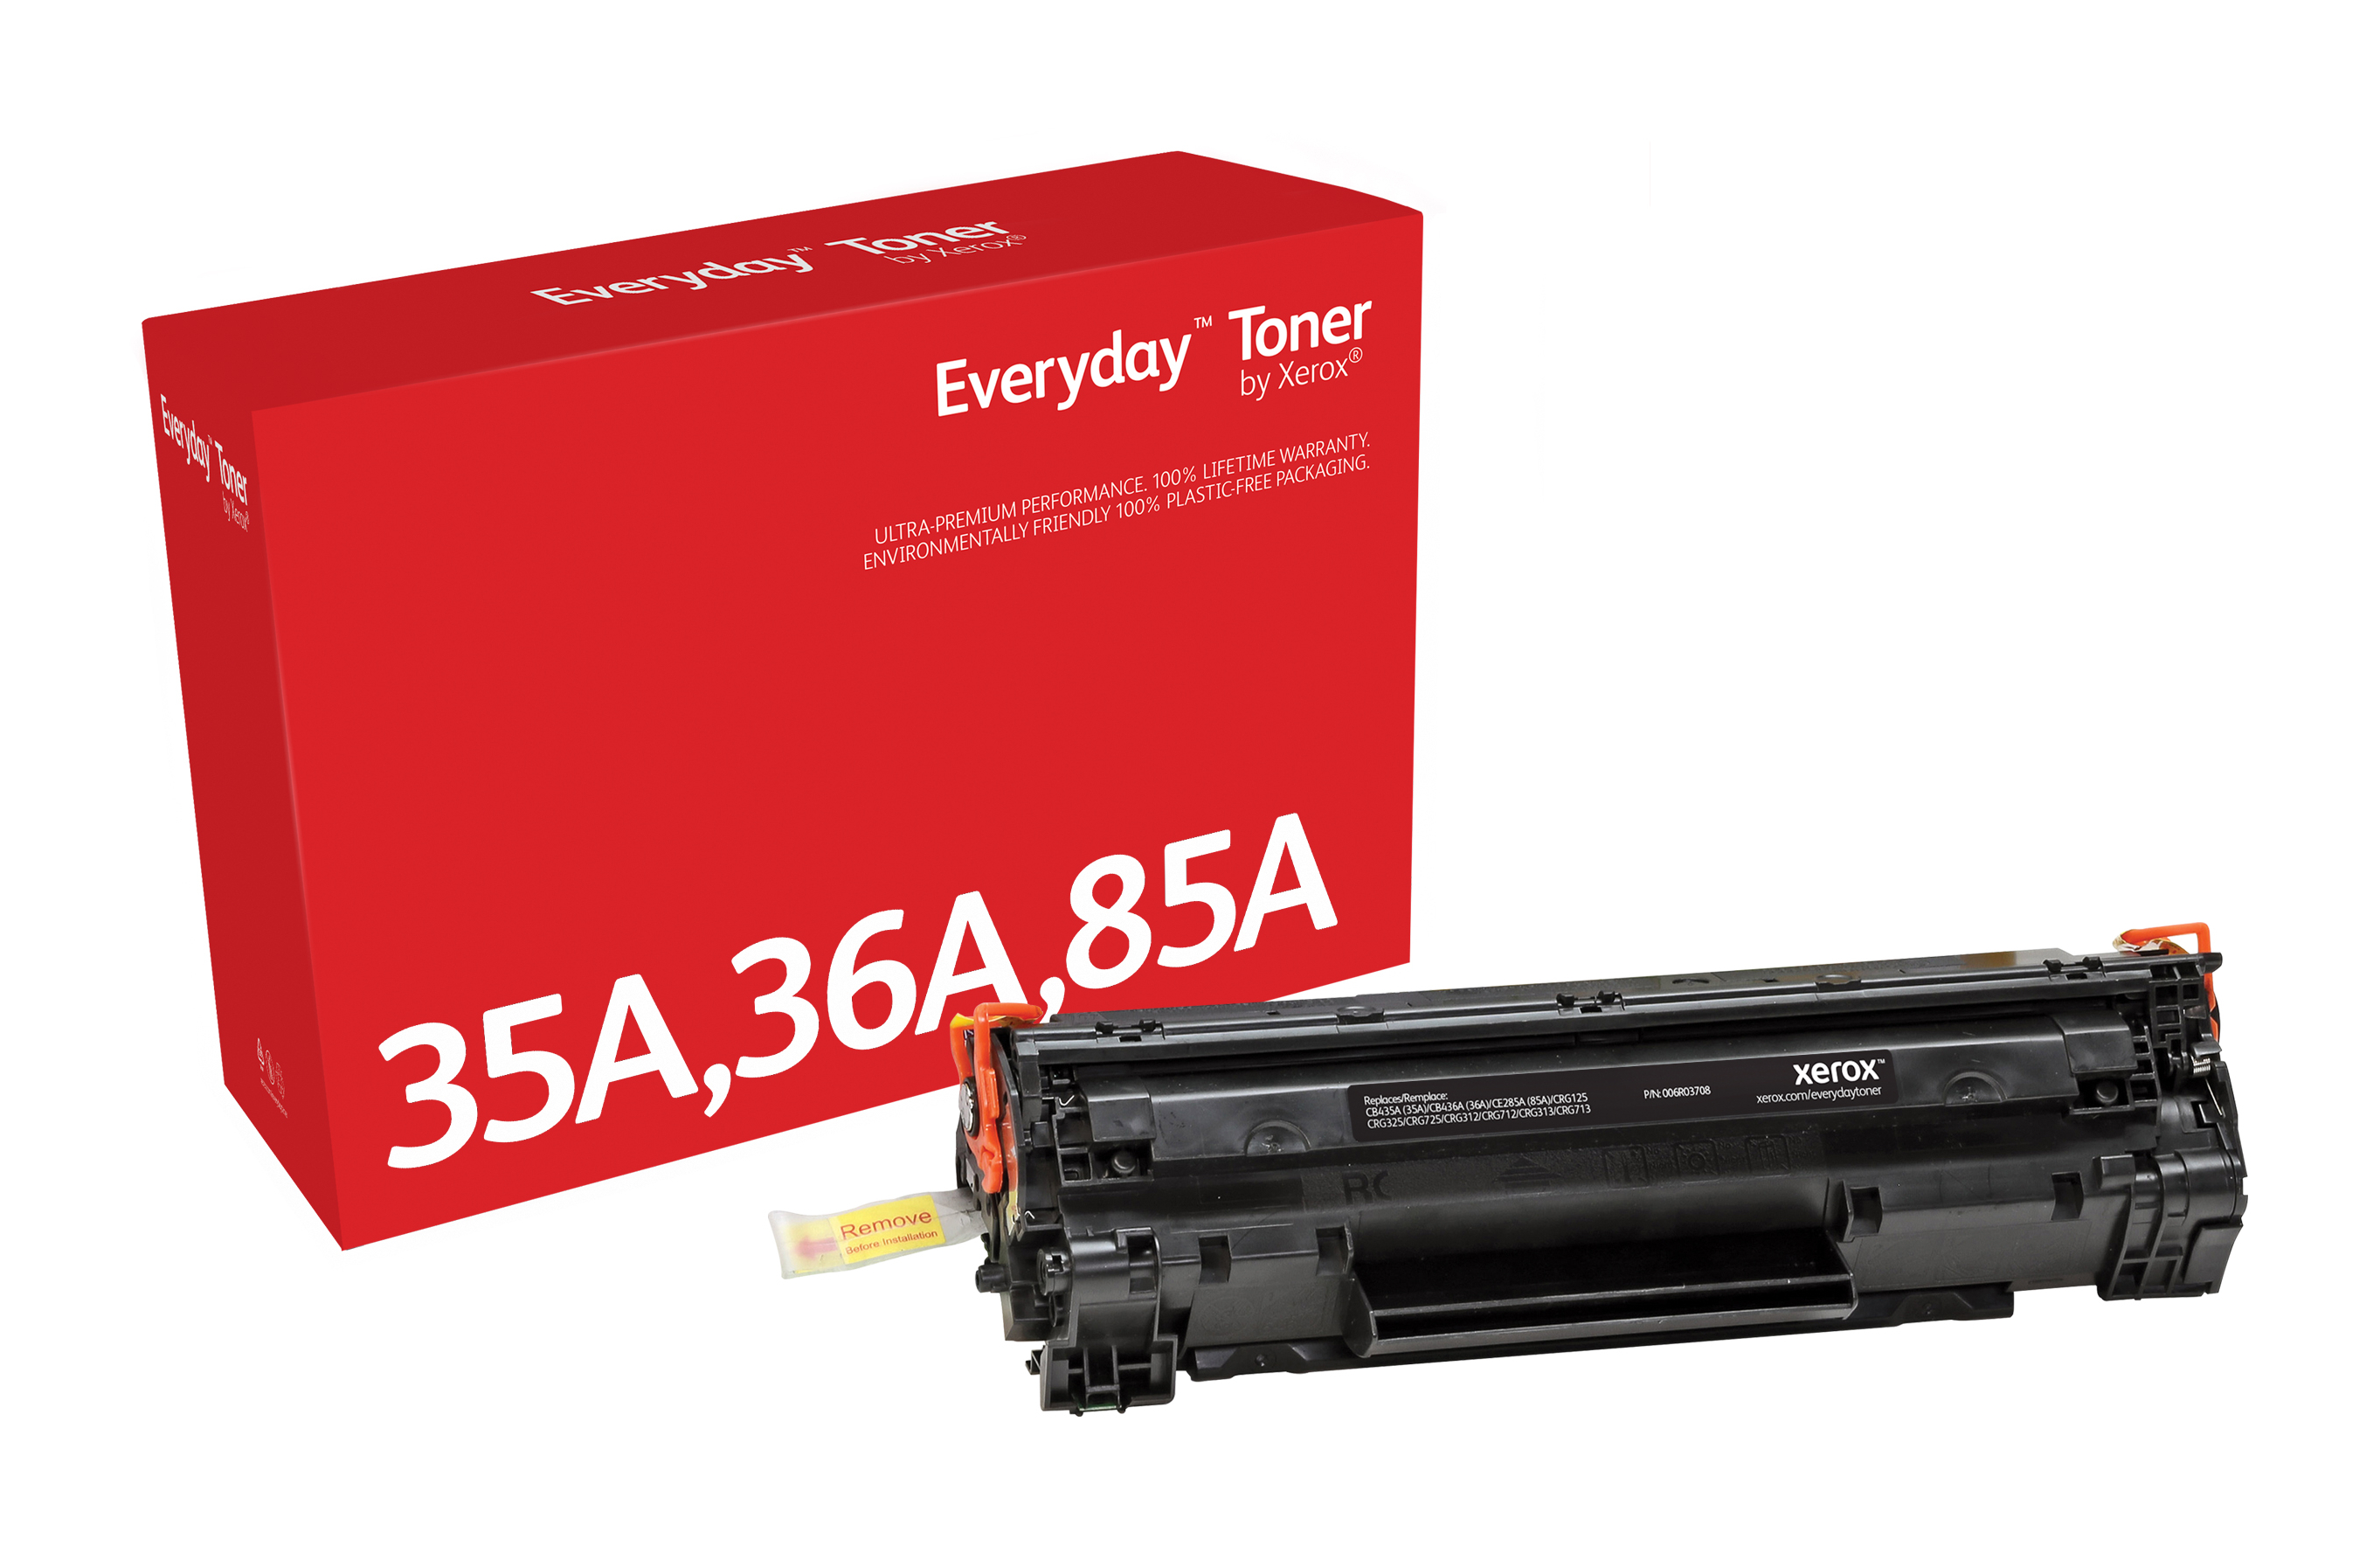 Everyday Black Toner compatible with HP 35A/ 36A/ 85A/ (CB435A/ CB436A/ CE285A), Standard 006R03708 by Xerox